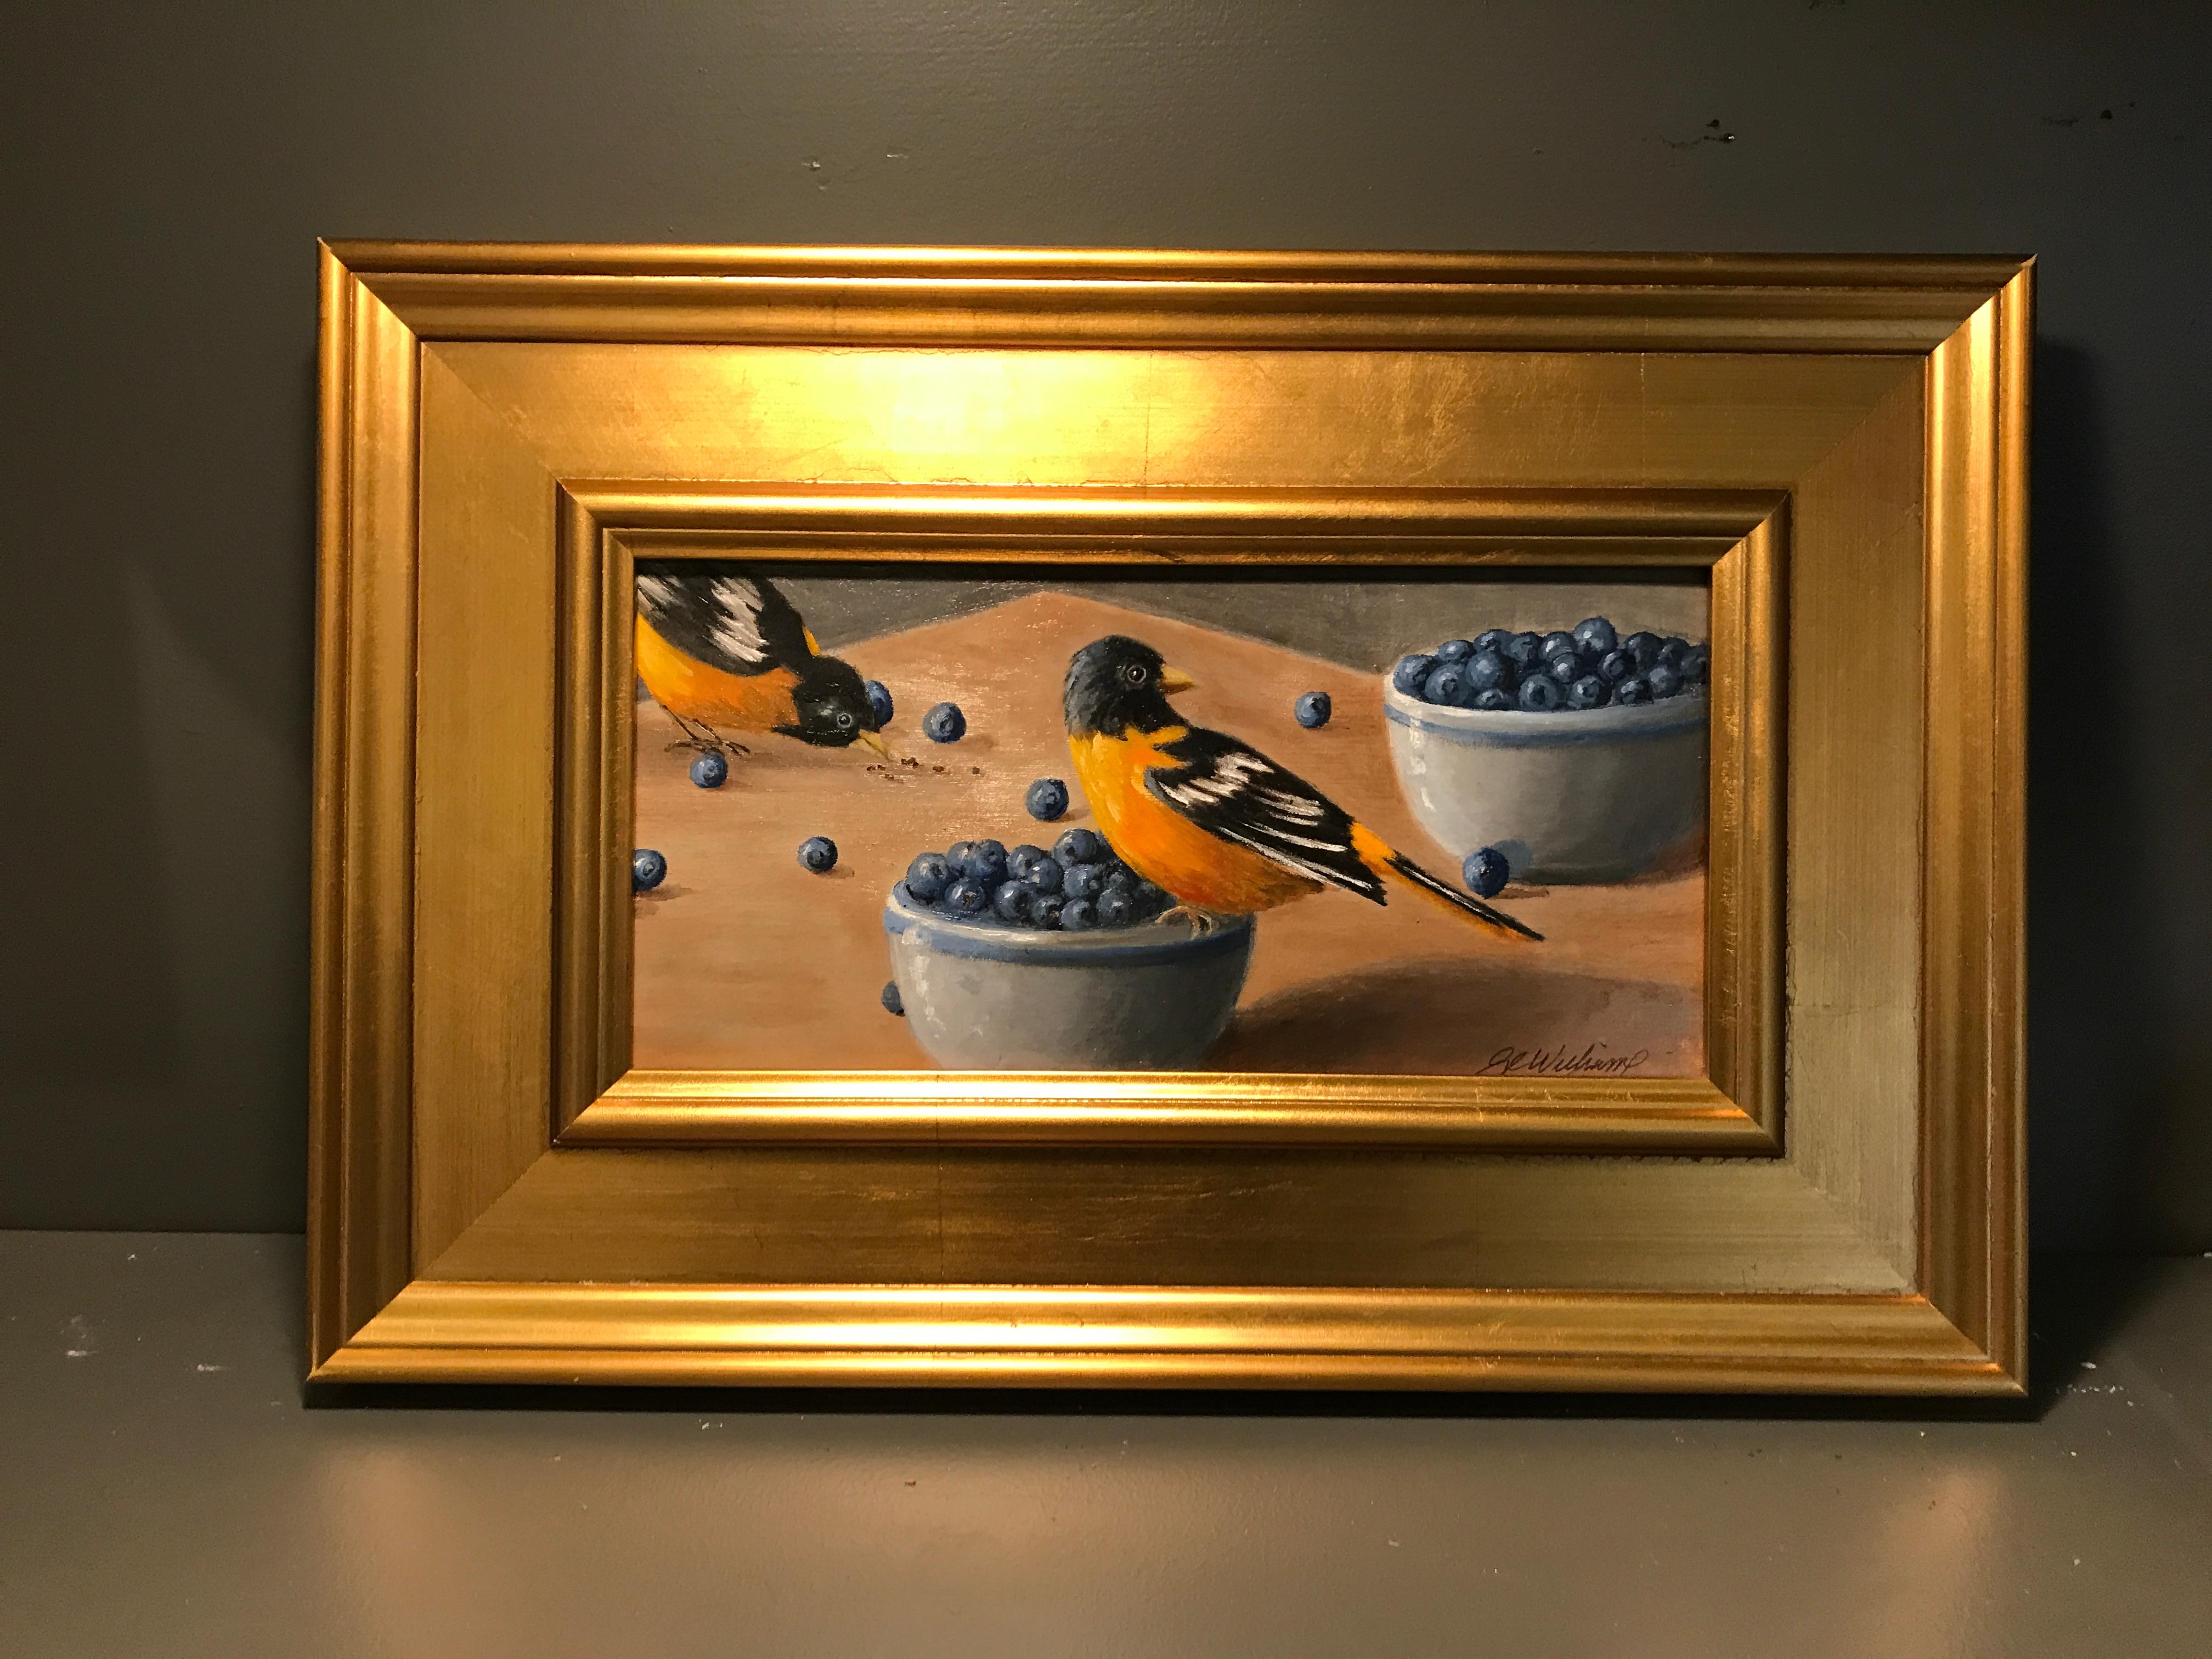 'Birds of a Feather' is a small gilt framed oil on board painting created by American artist Ginny Williams in 2018. Featuring a palette made of orange, blue, black and grey tones, this painting depicts two lovely birds pecking at blueberries.